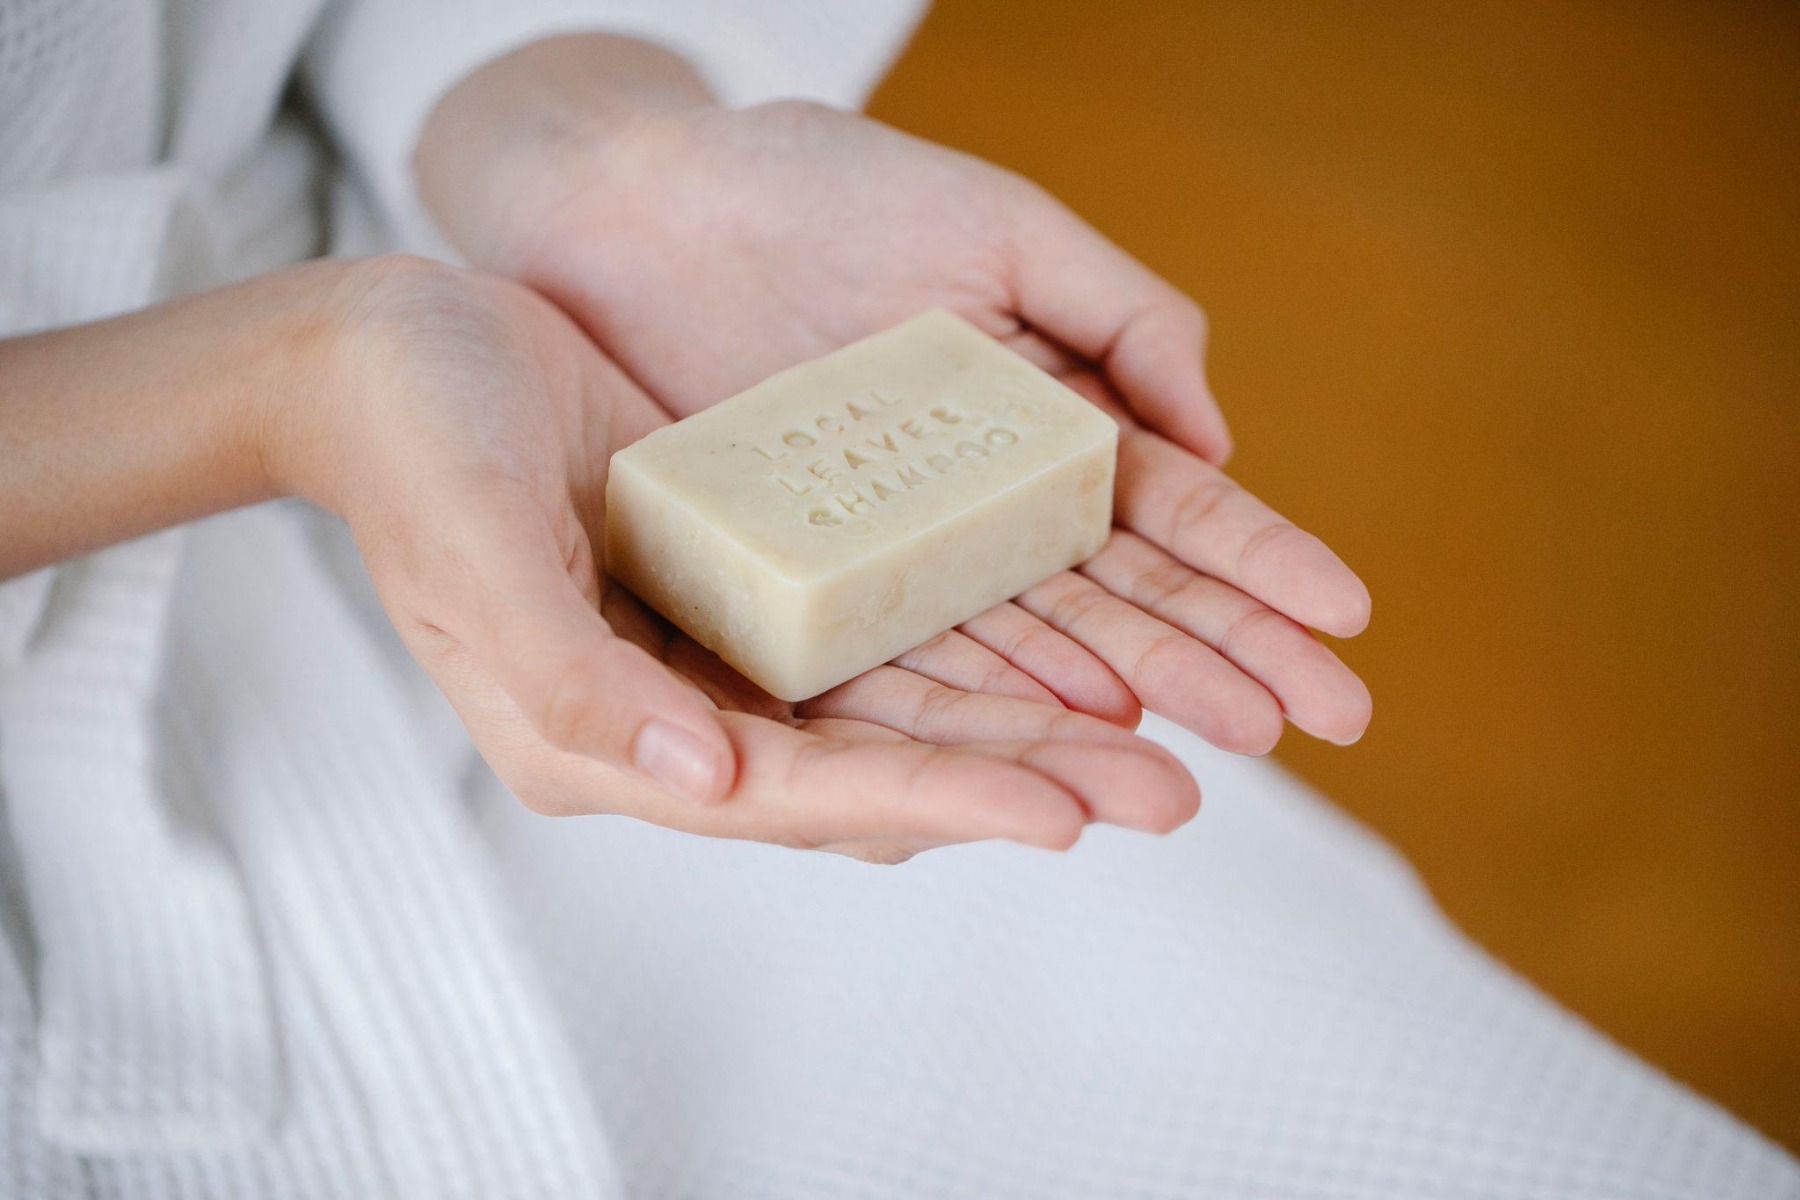 Woman holding a shampoo bar in her hand